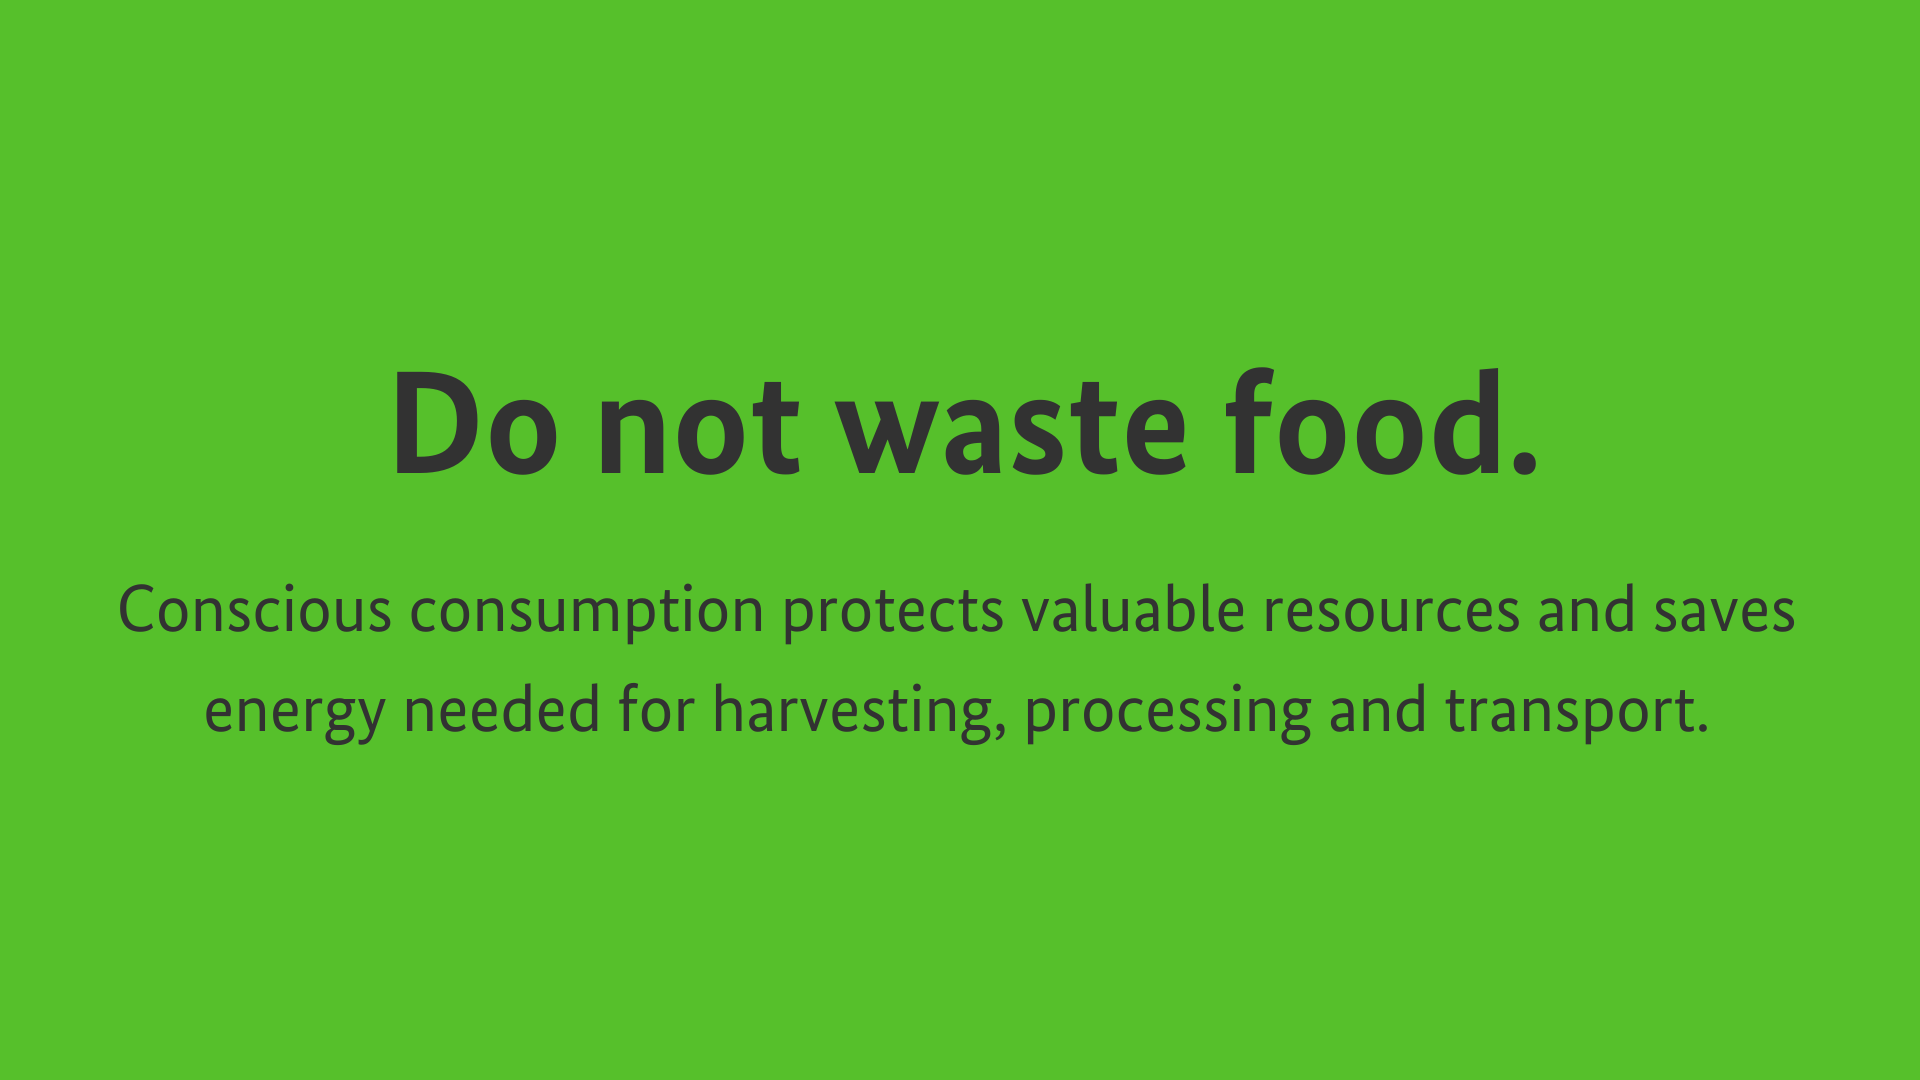 Do not waste food. Conscious consumption protects valuable resources and saves energy needed for harvesting, processing and transport.